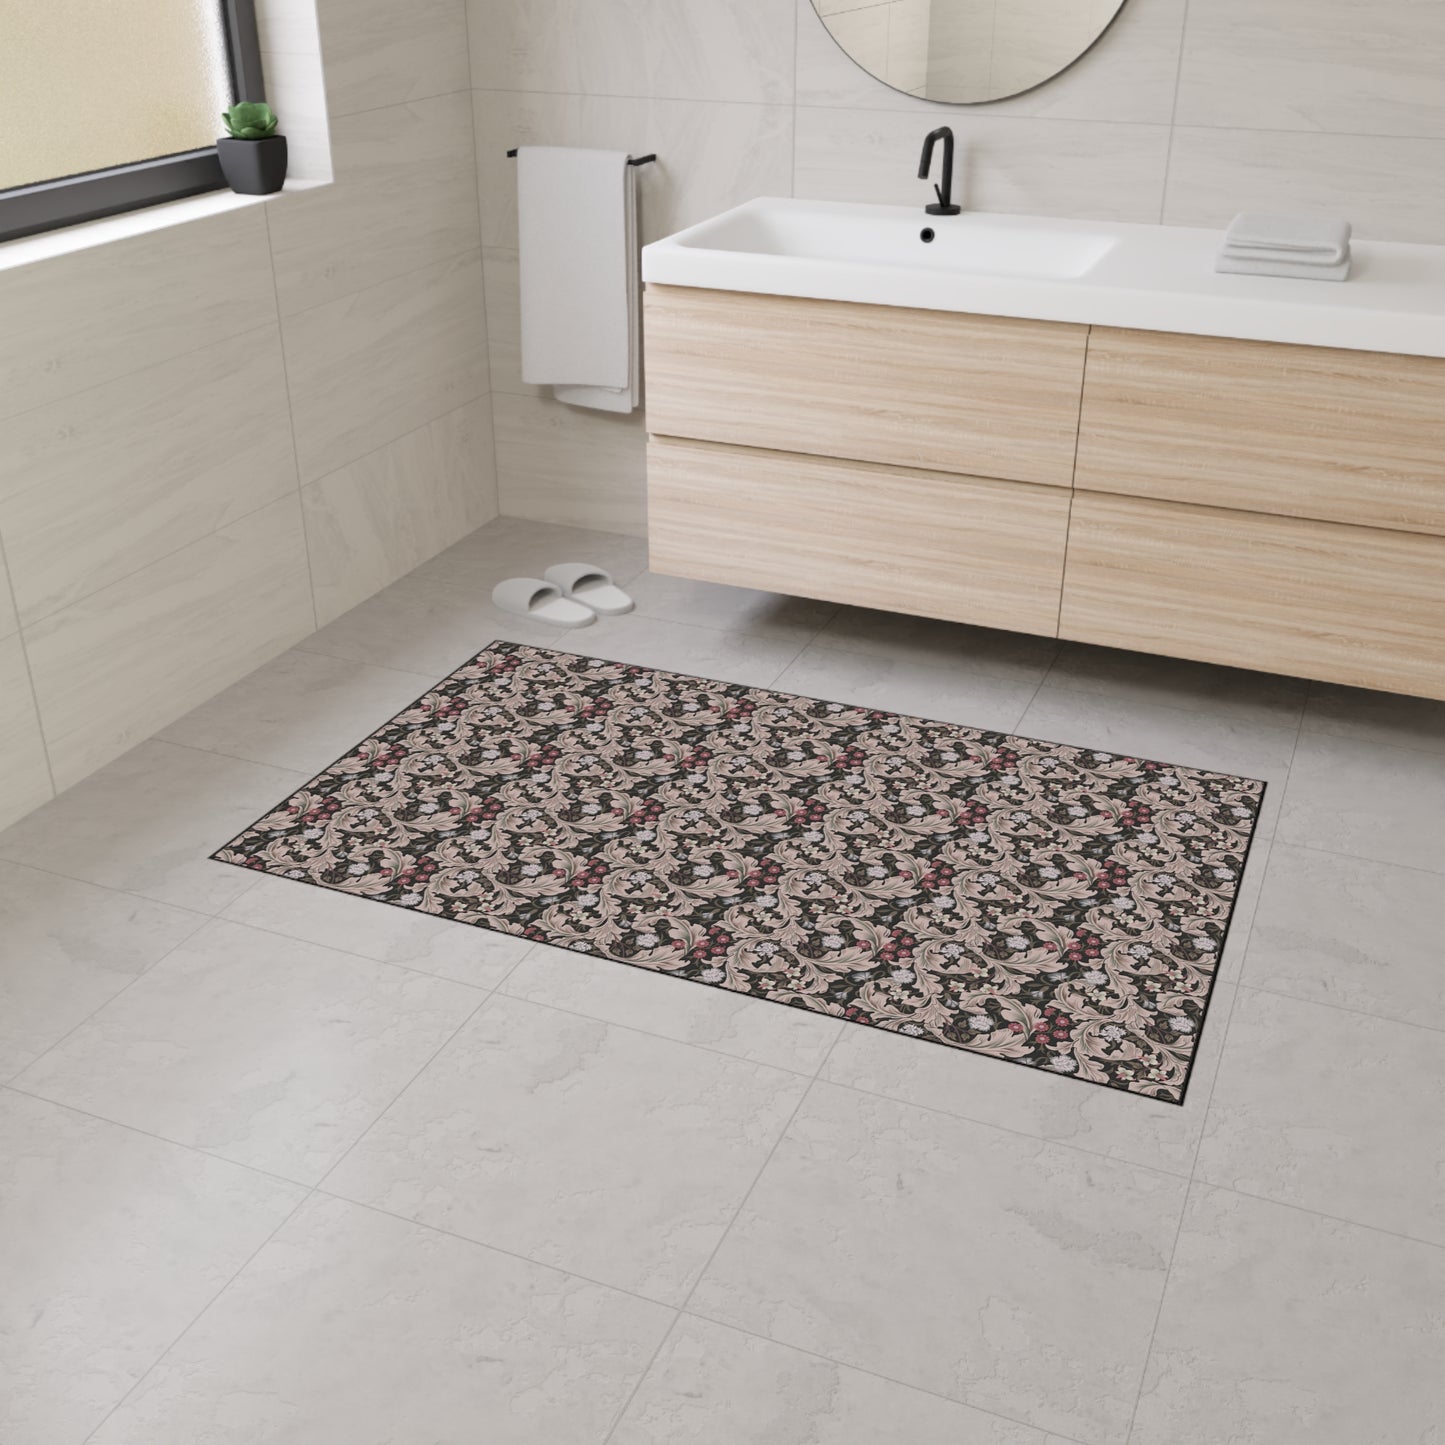 william-morris-co-heavy-duty-floor-mat-leicester-collection-mocha-16